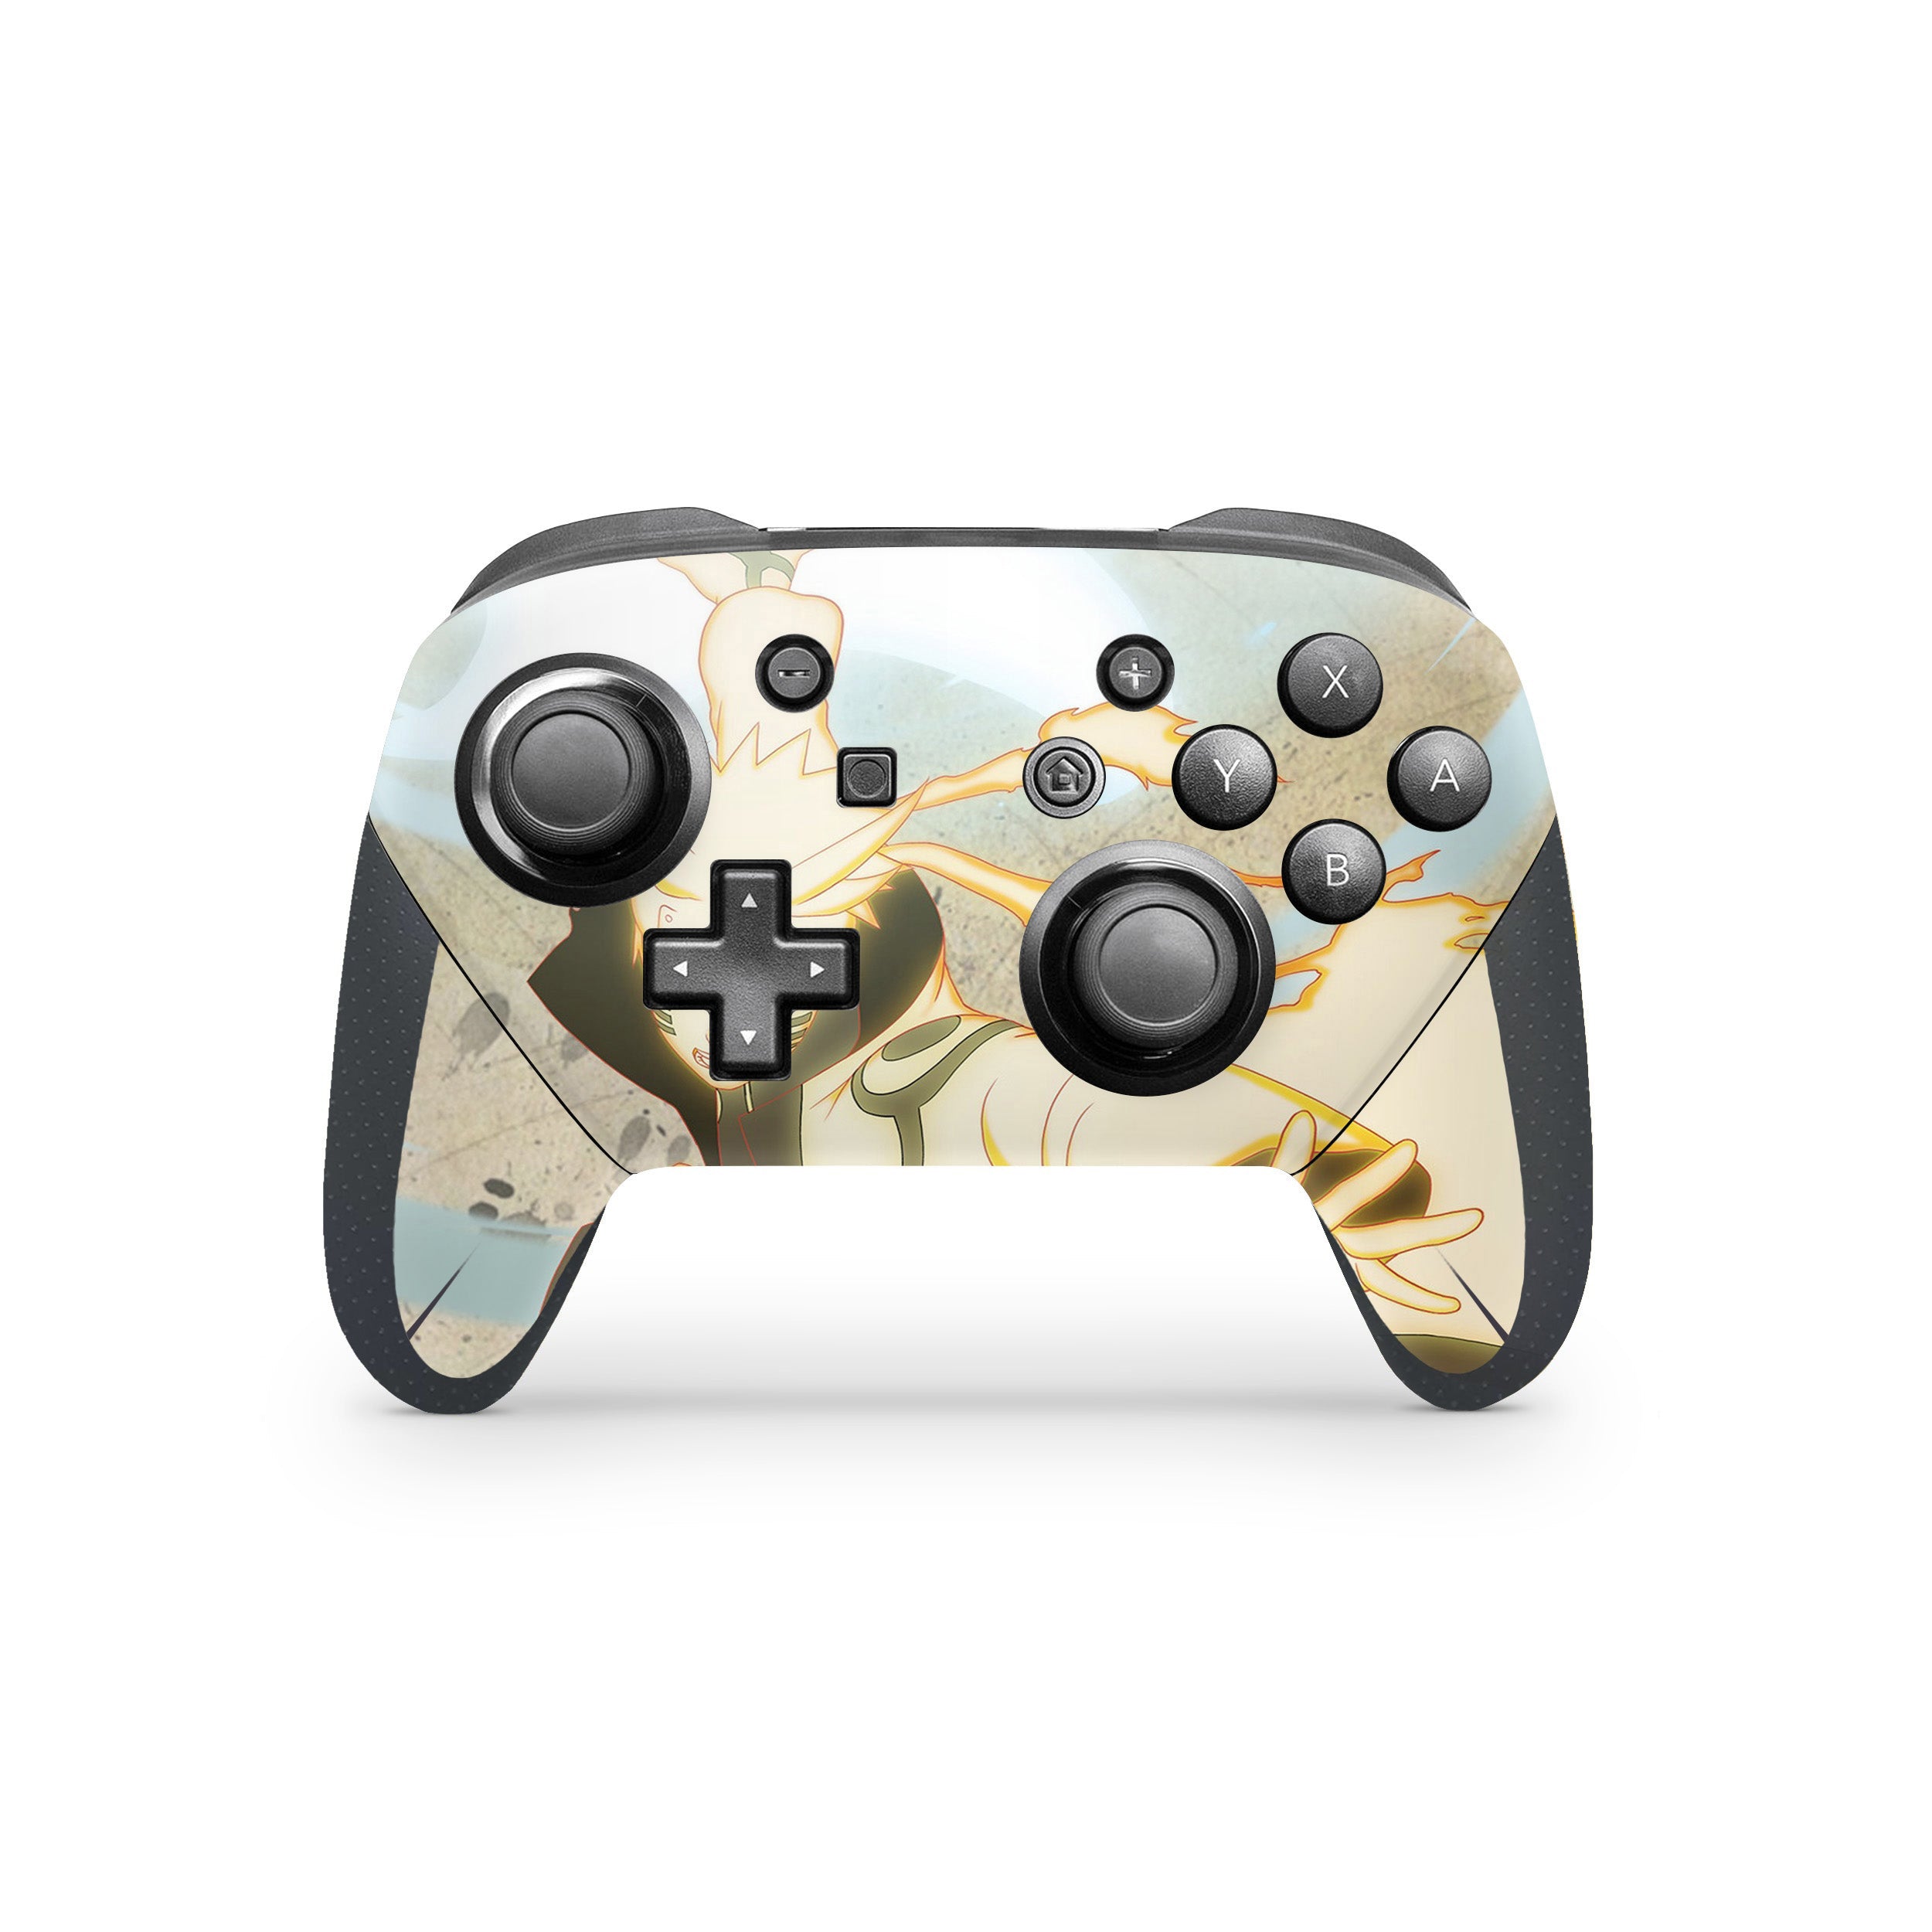 A video game skin featuring a My Hero Academia Tsuyu Asui design for the Switch Pro Controller.